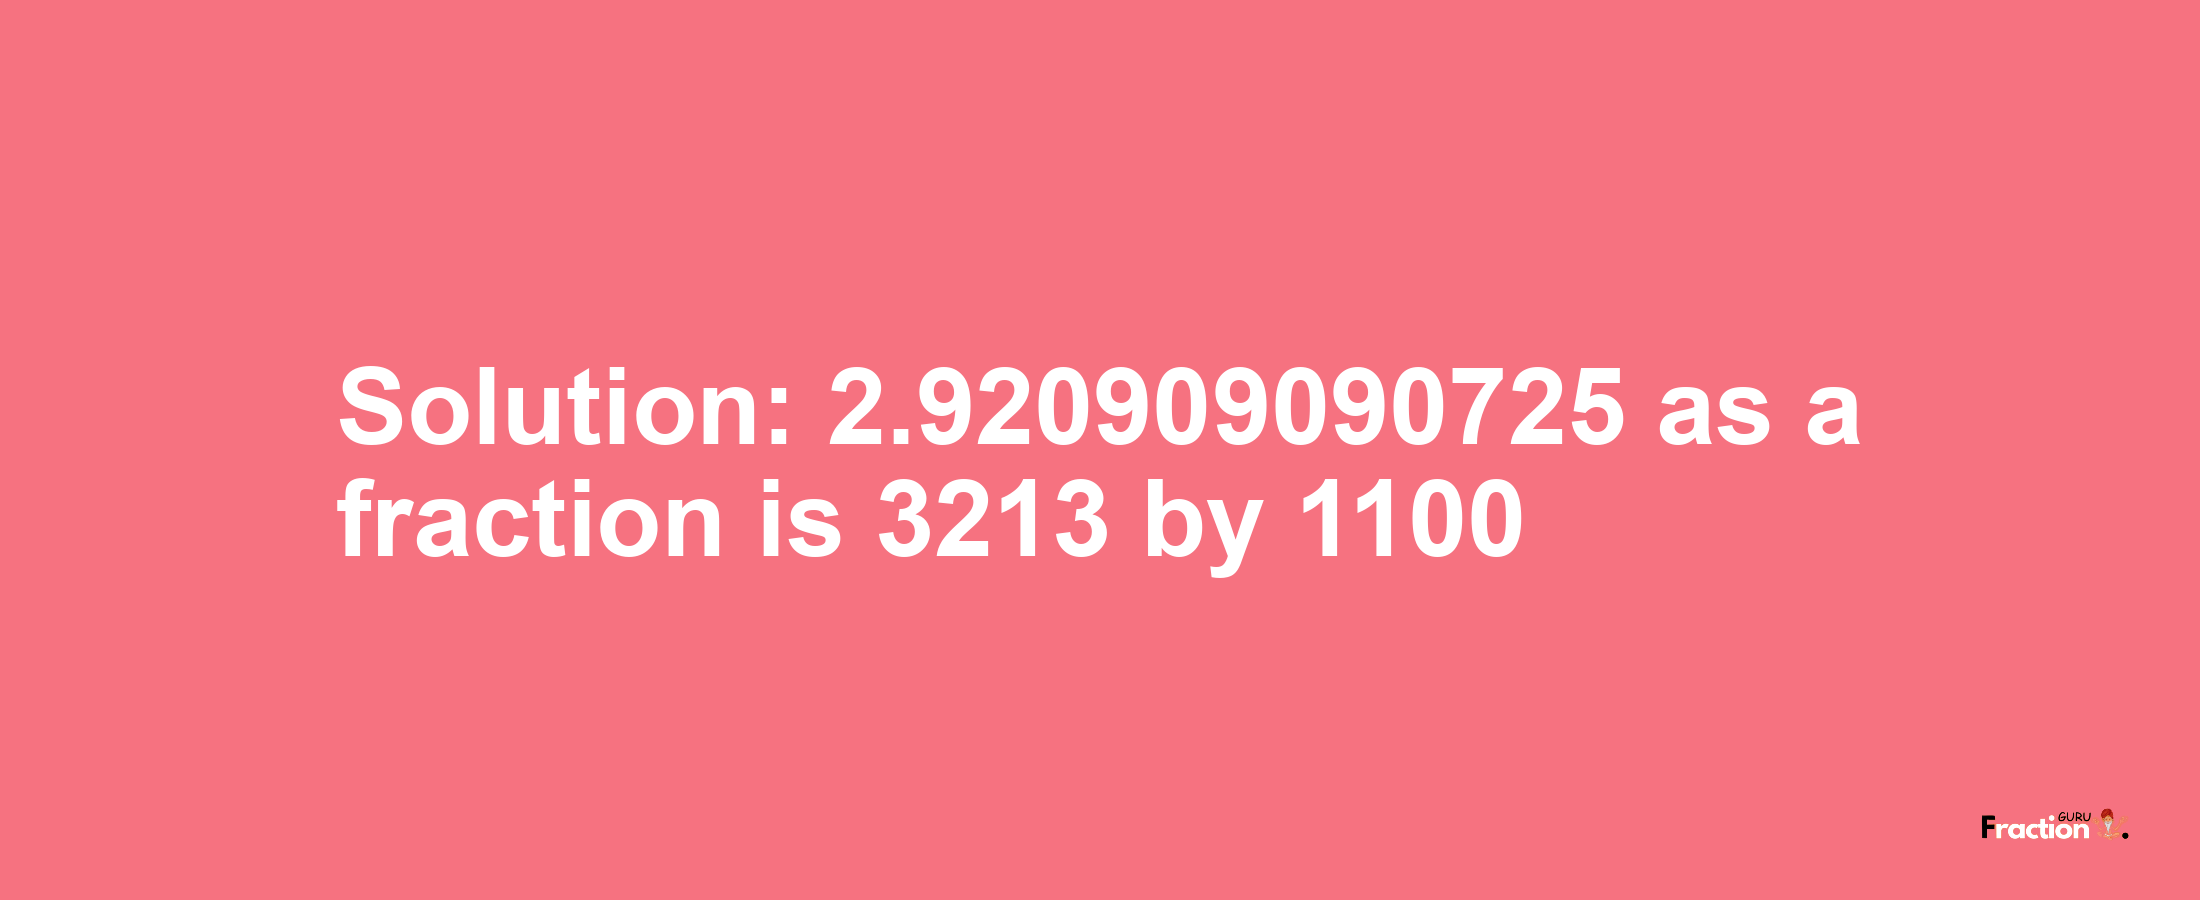 Solution:2.920909090725 as a fraction is 3213/1100